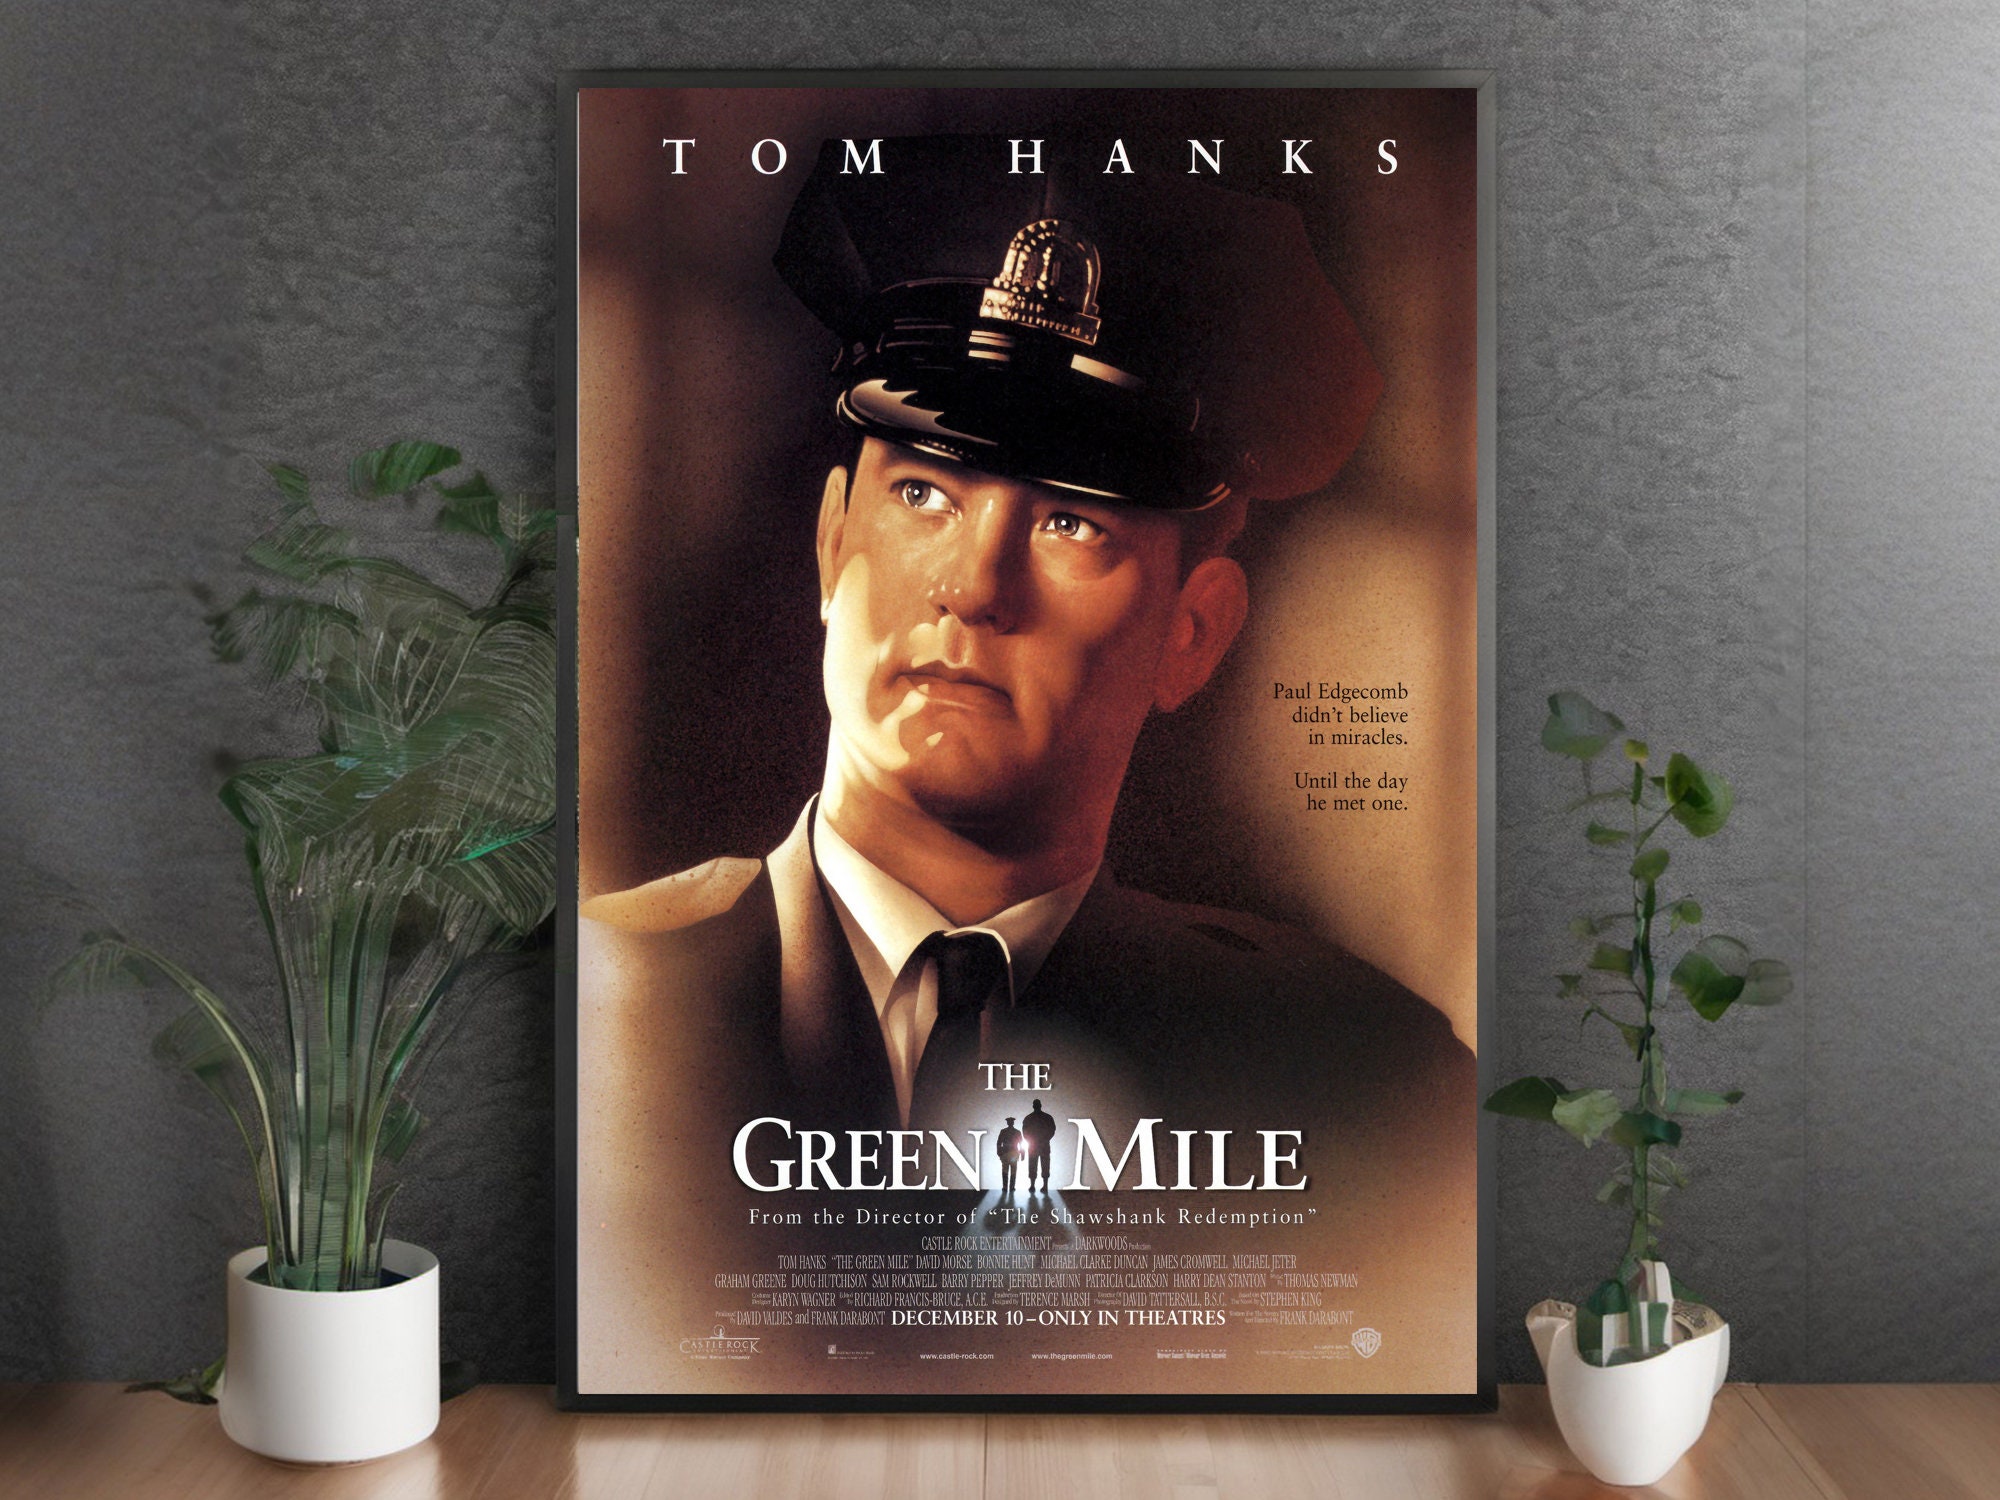 The Green Mile Movie posters